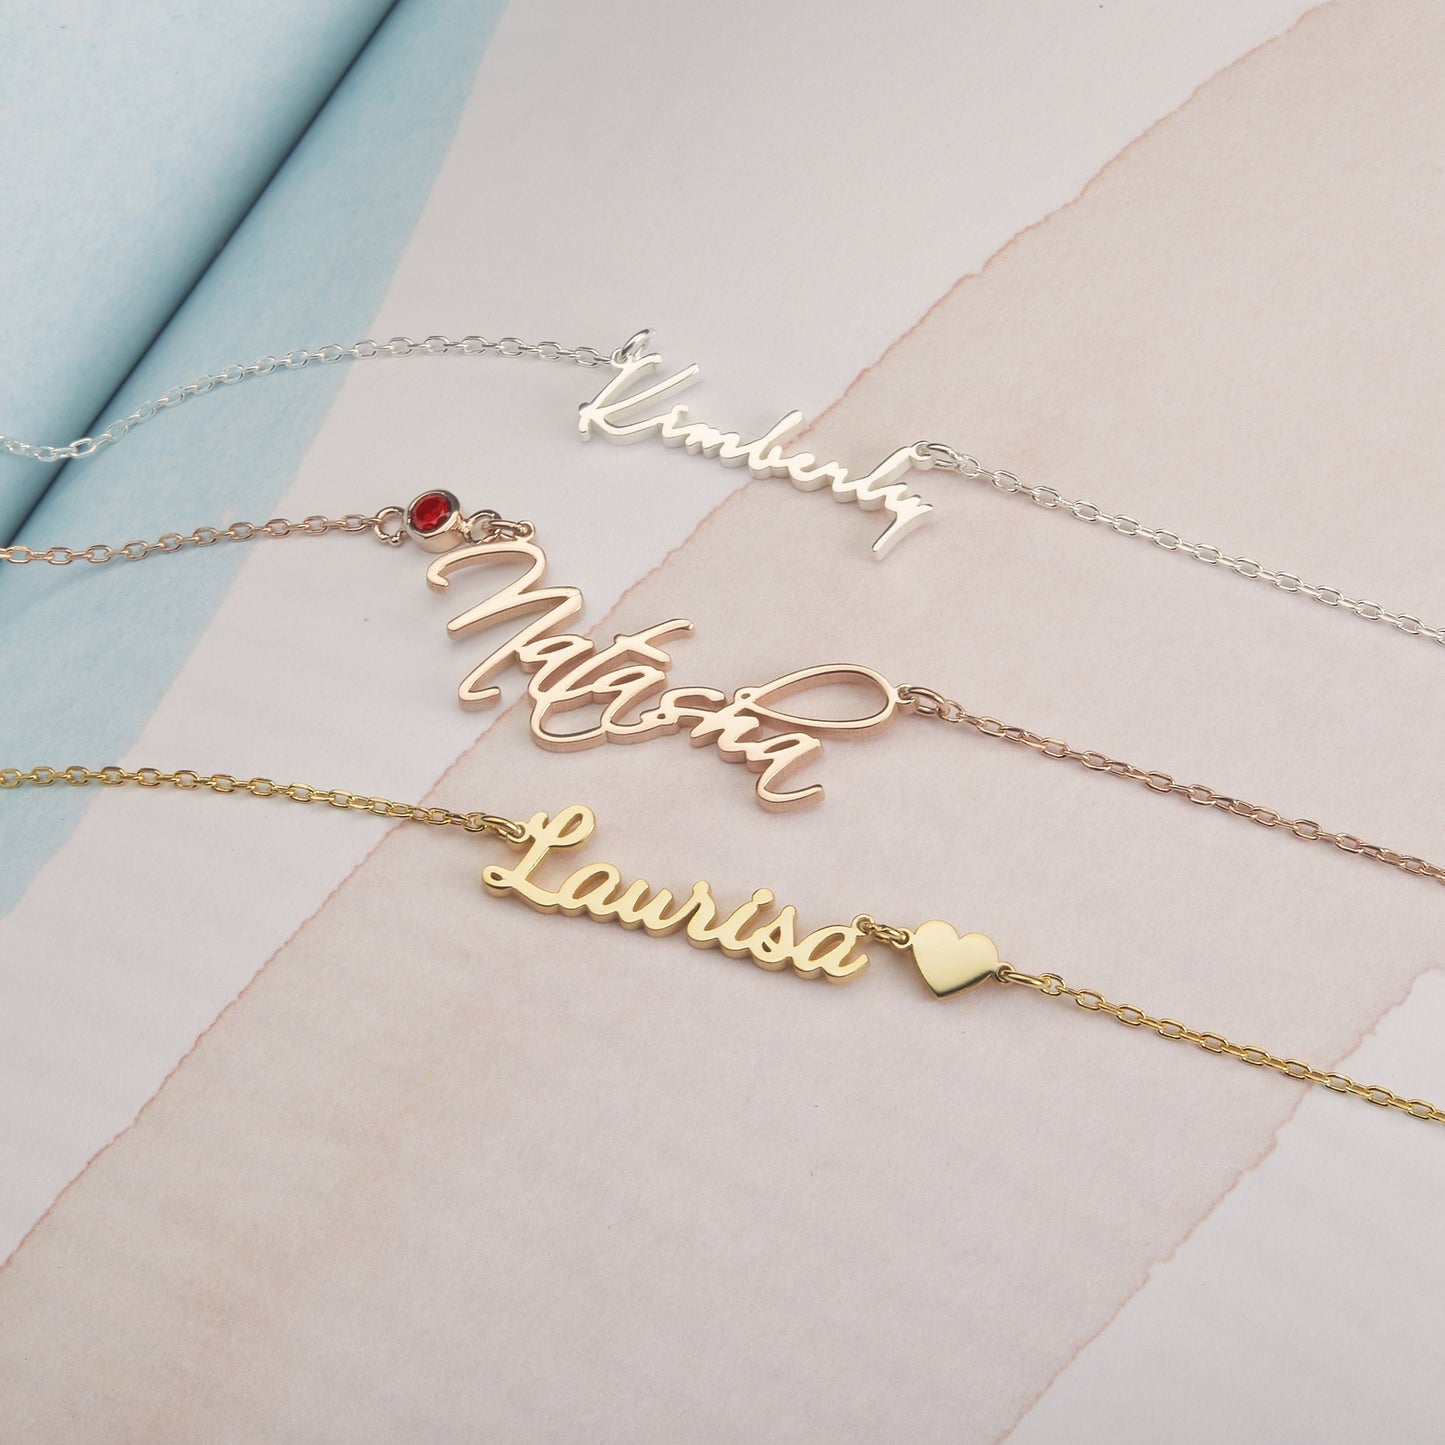 Name Jewelry | Dainty Name Necklace |  Personalized Name Necklace | Custom Name Necklace | Baby Name Necklace | Gift for Her | Gift for Mom